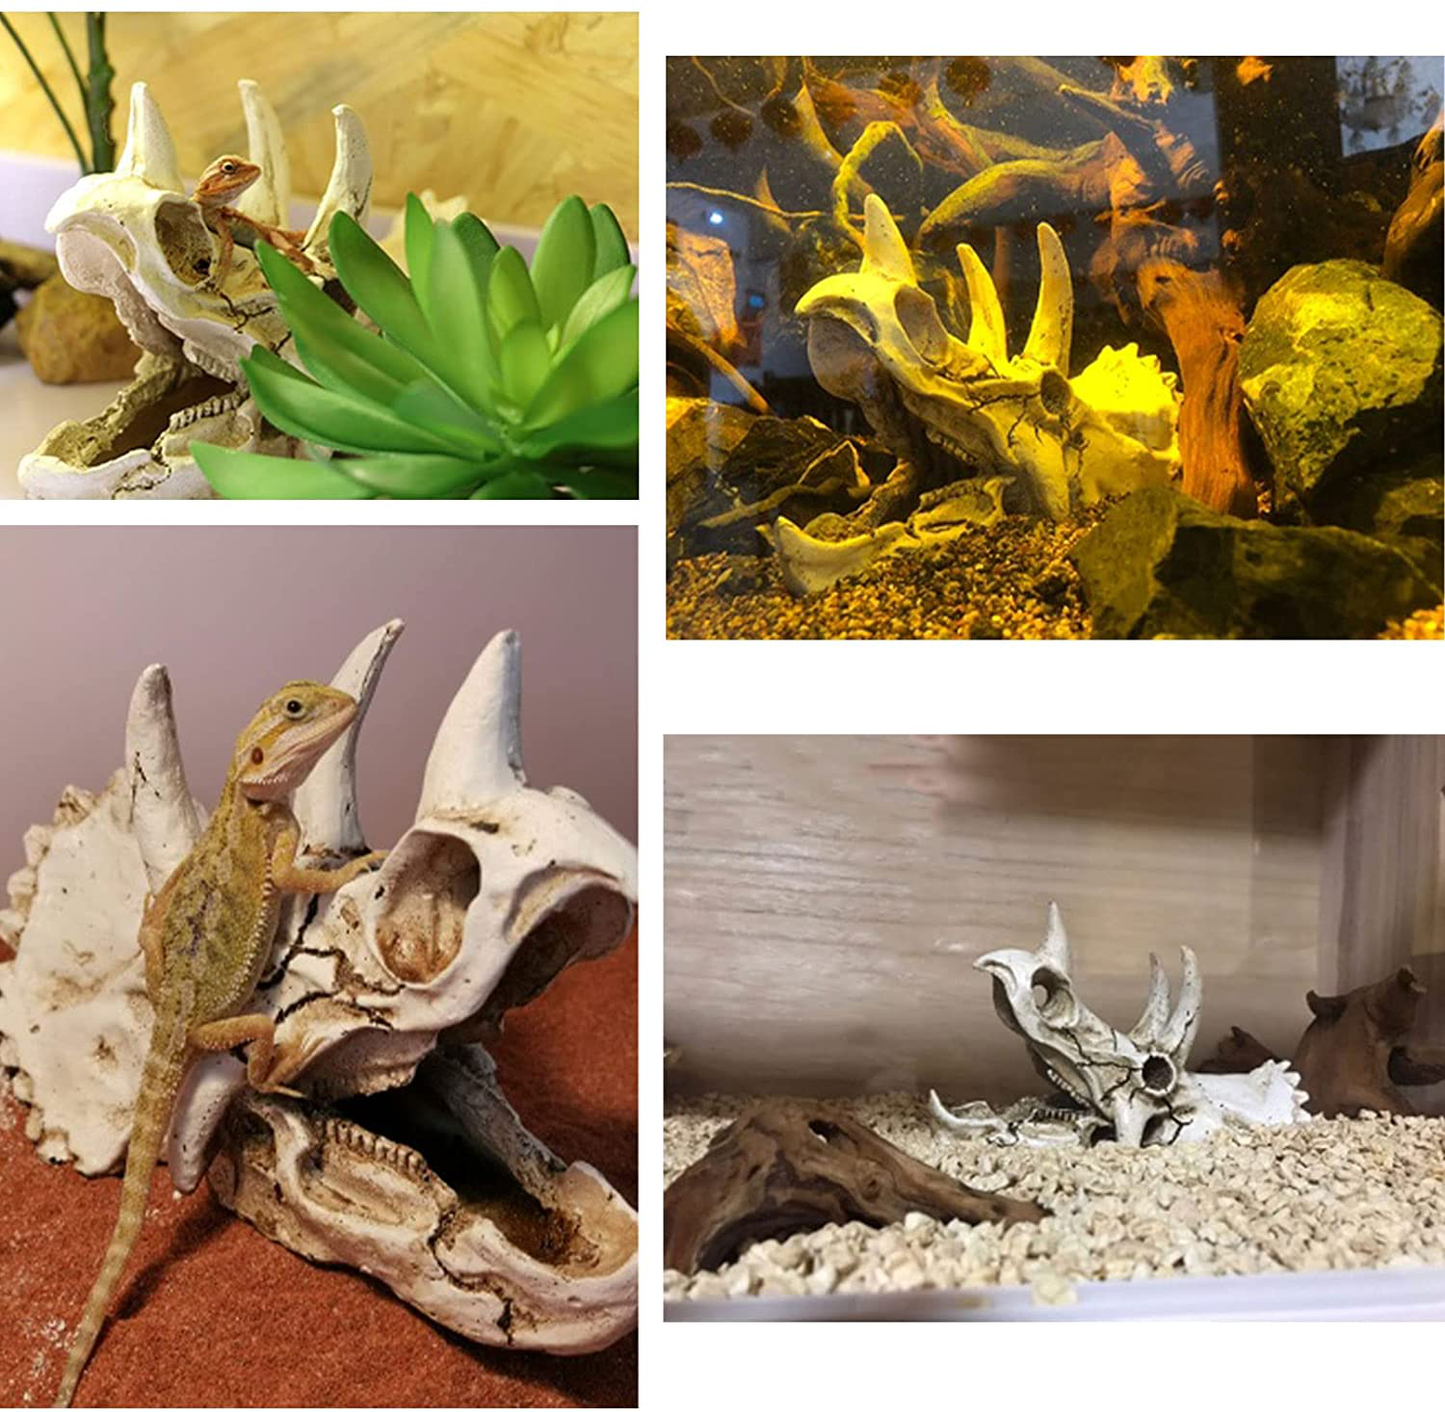 Tfwadmx Bearded Dragon Tank Accessories Resin Dinosaur Triceratops Skull Skeleton Reptiles Hideouts Cave Vines Leaves Aquarium Decorations for Lizards,Chameleon,Snake,Spider,Gecko Animals & Pet Supplies > Pet Supplies > Reptile & Amphibian Supplies > Reptile & Amphibian Habitat Accessories Tfwadmx   